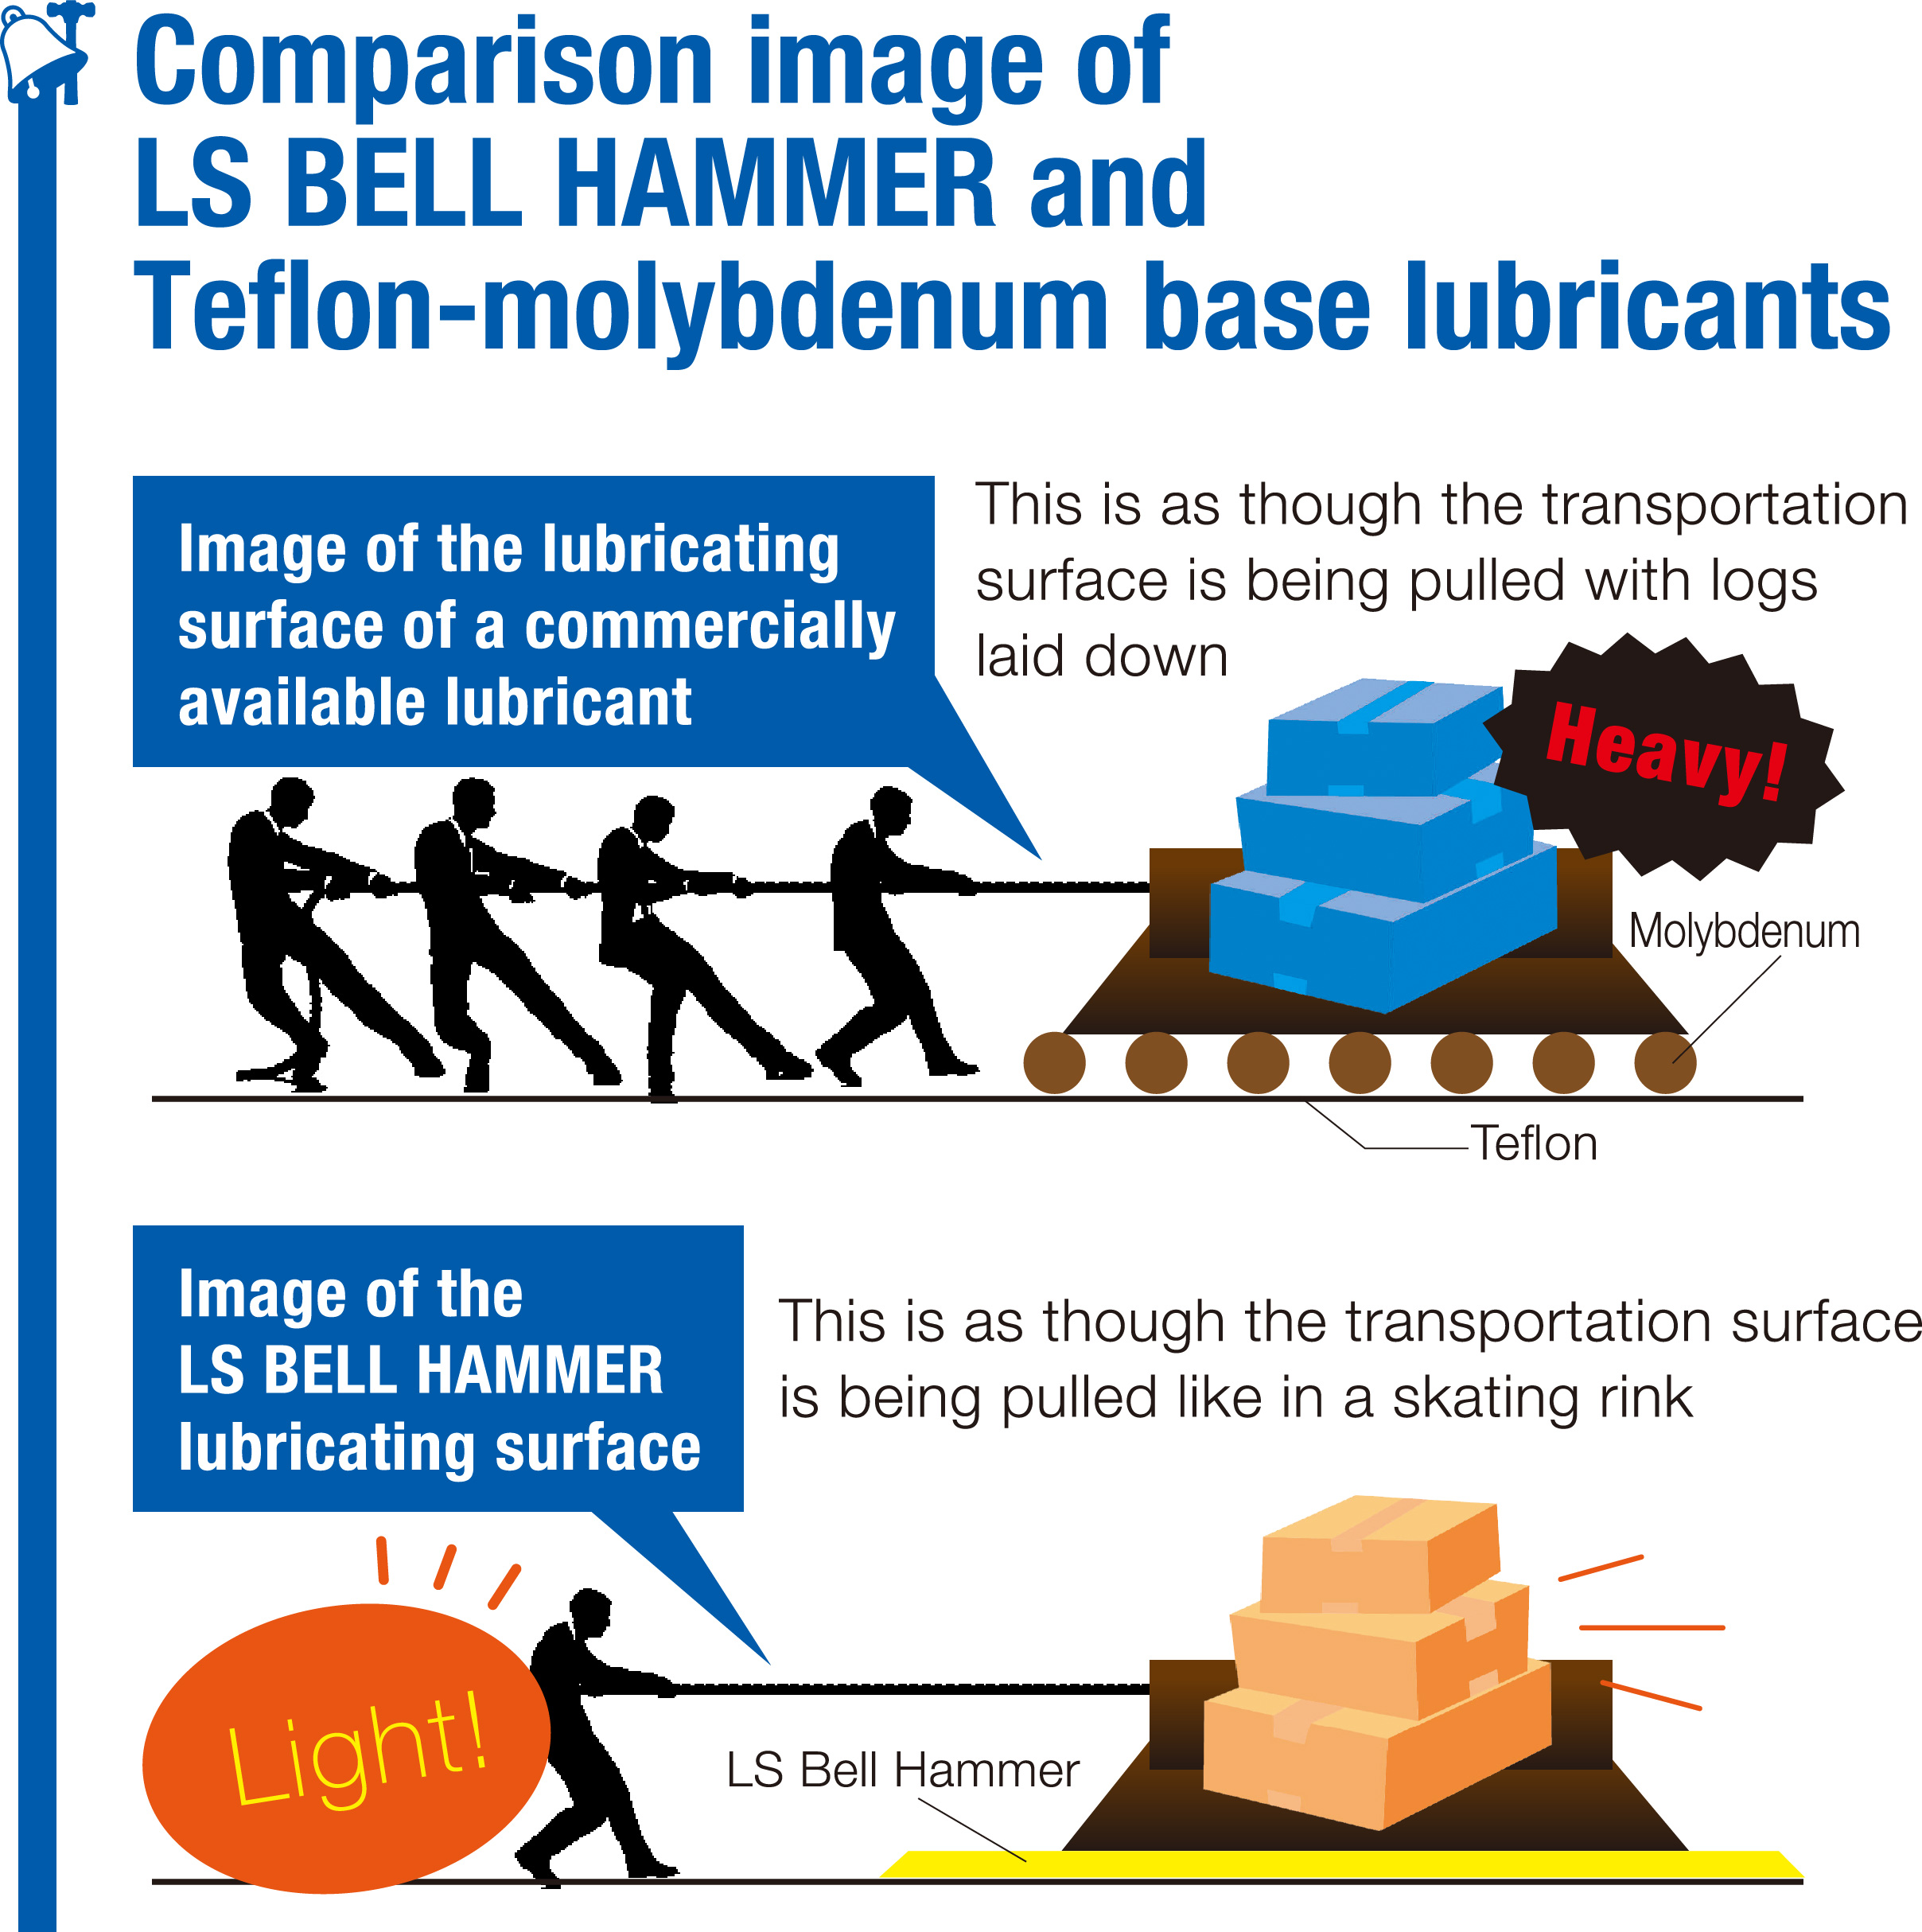 Comparison image of LS BELL HAMMER and Teflon-molybdenum base lubricants